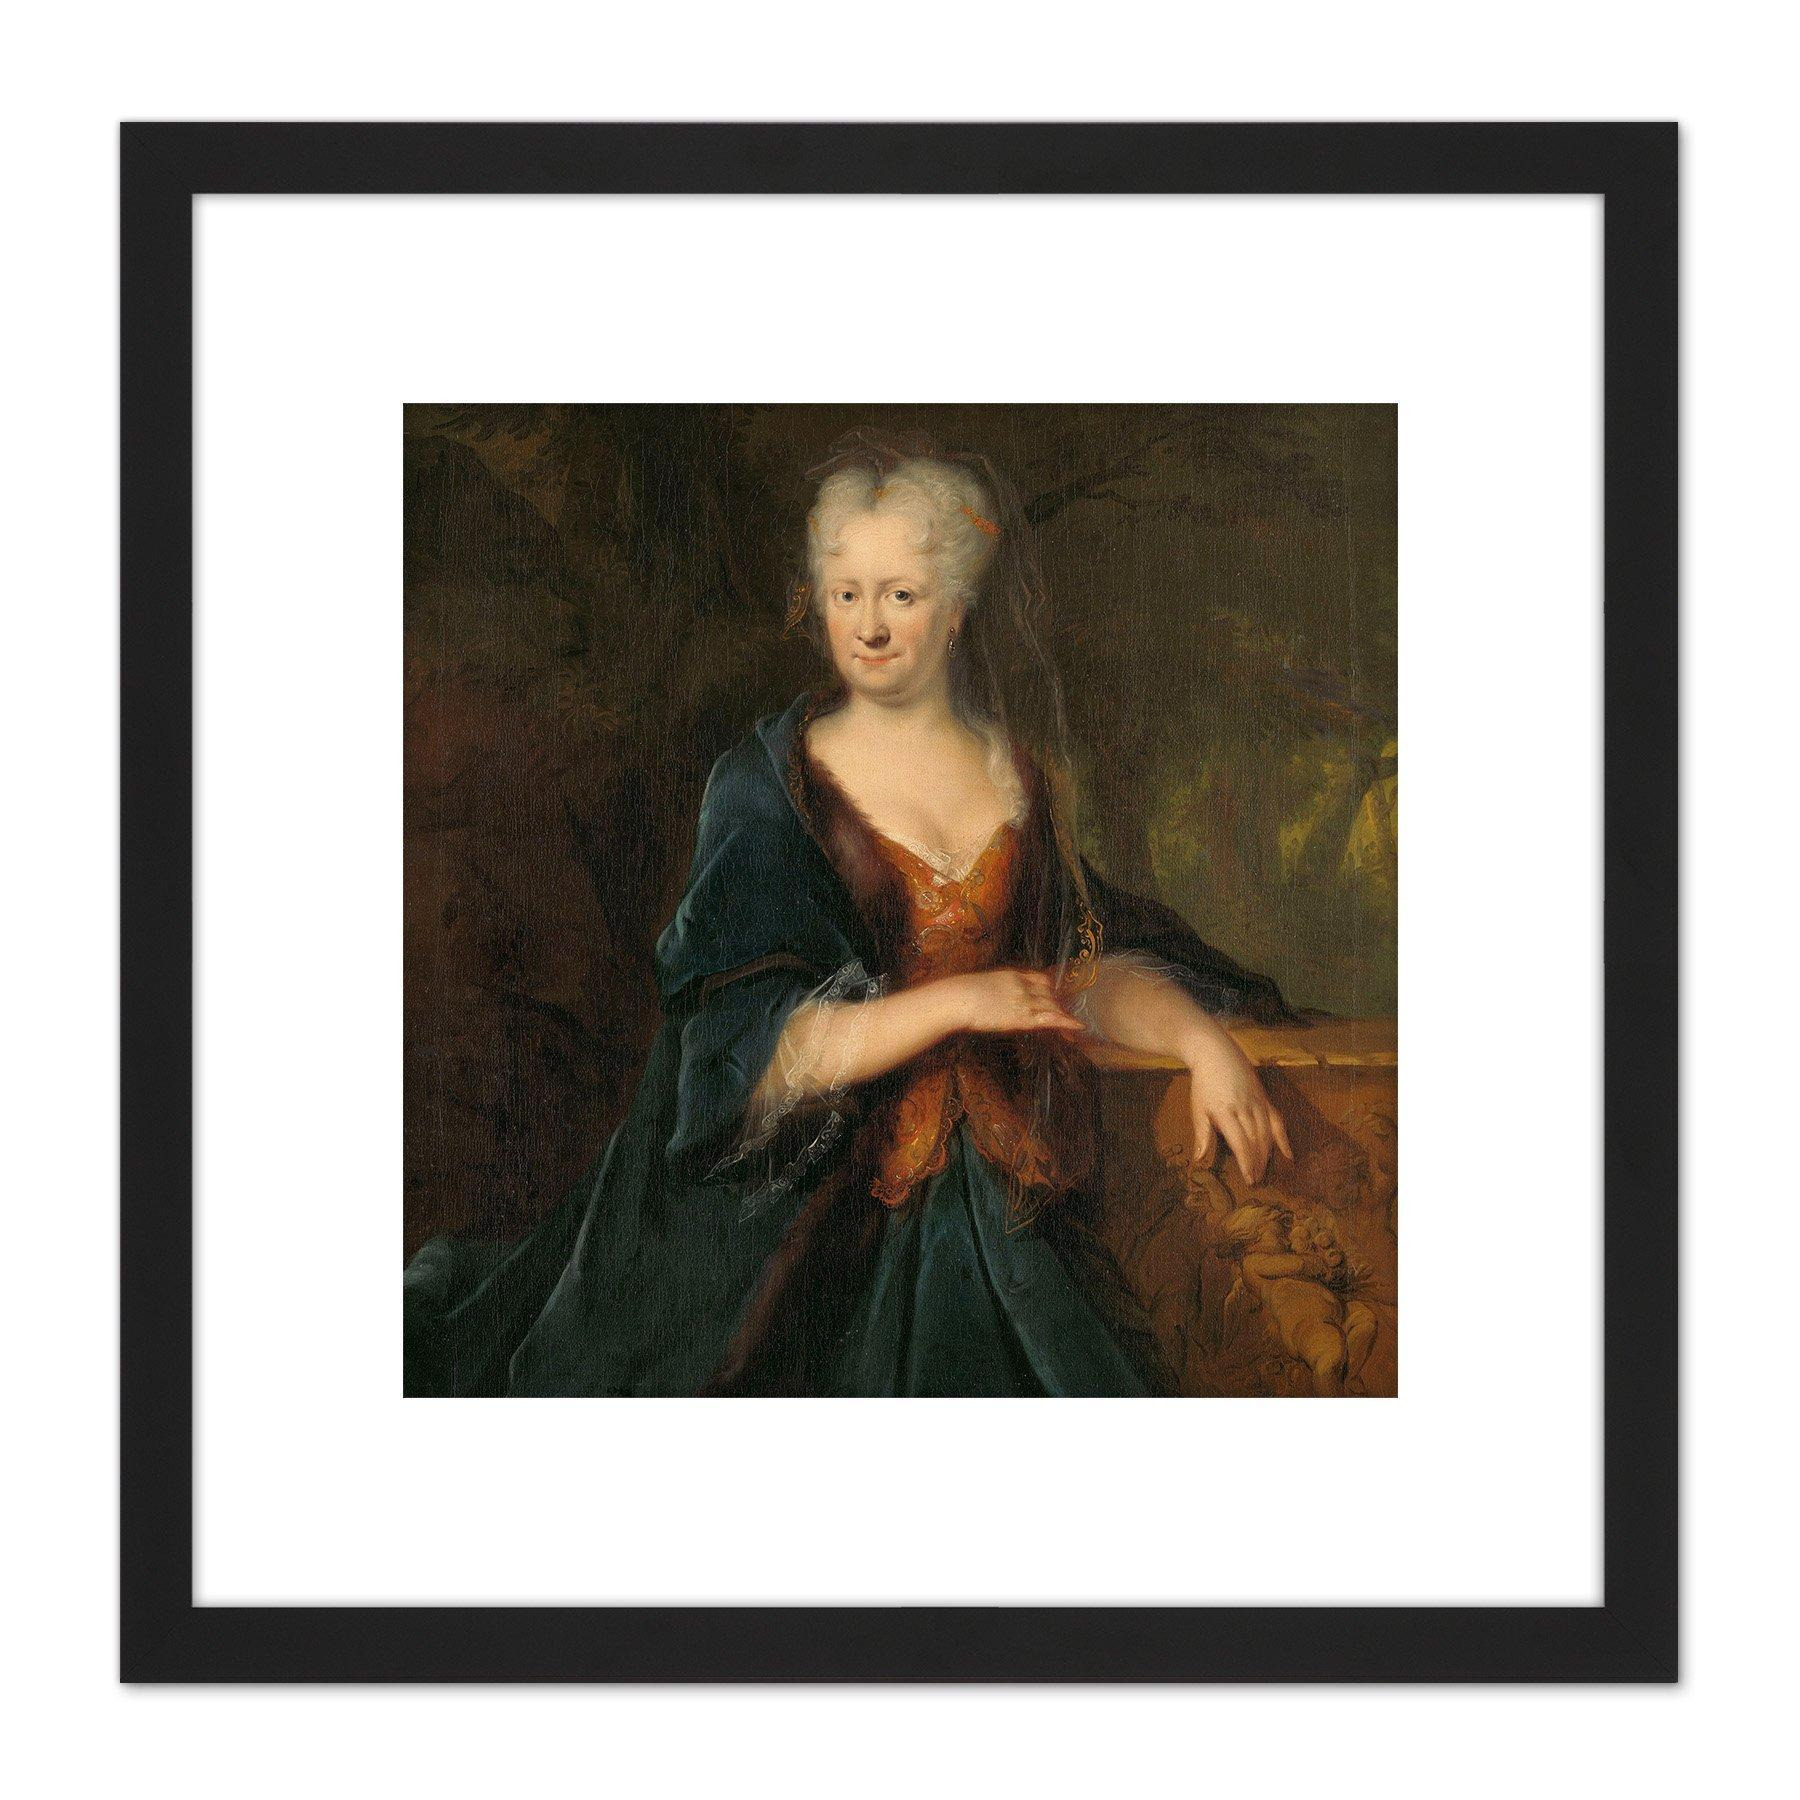 Troost Portrait Louise Christina Trip 8X8 Inch Square Wooden Framed Wall Art Print Picture with Mount - image 1